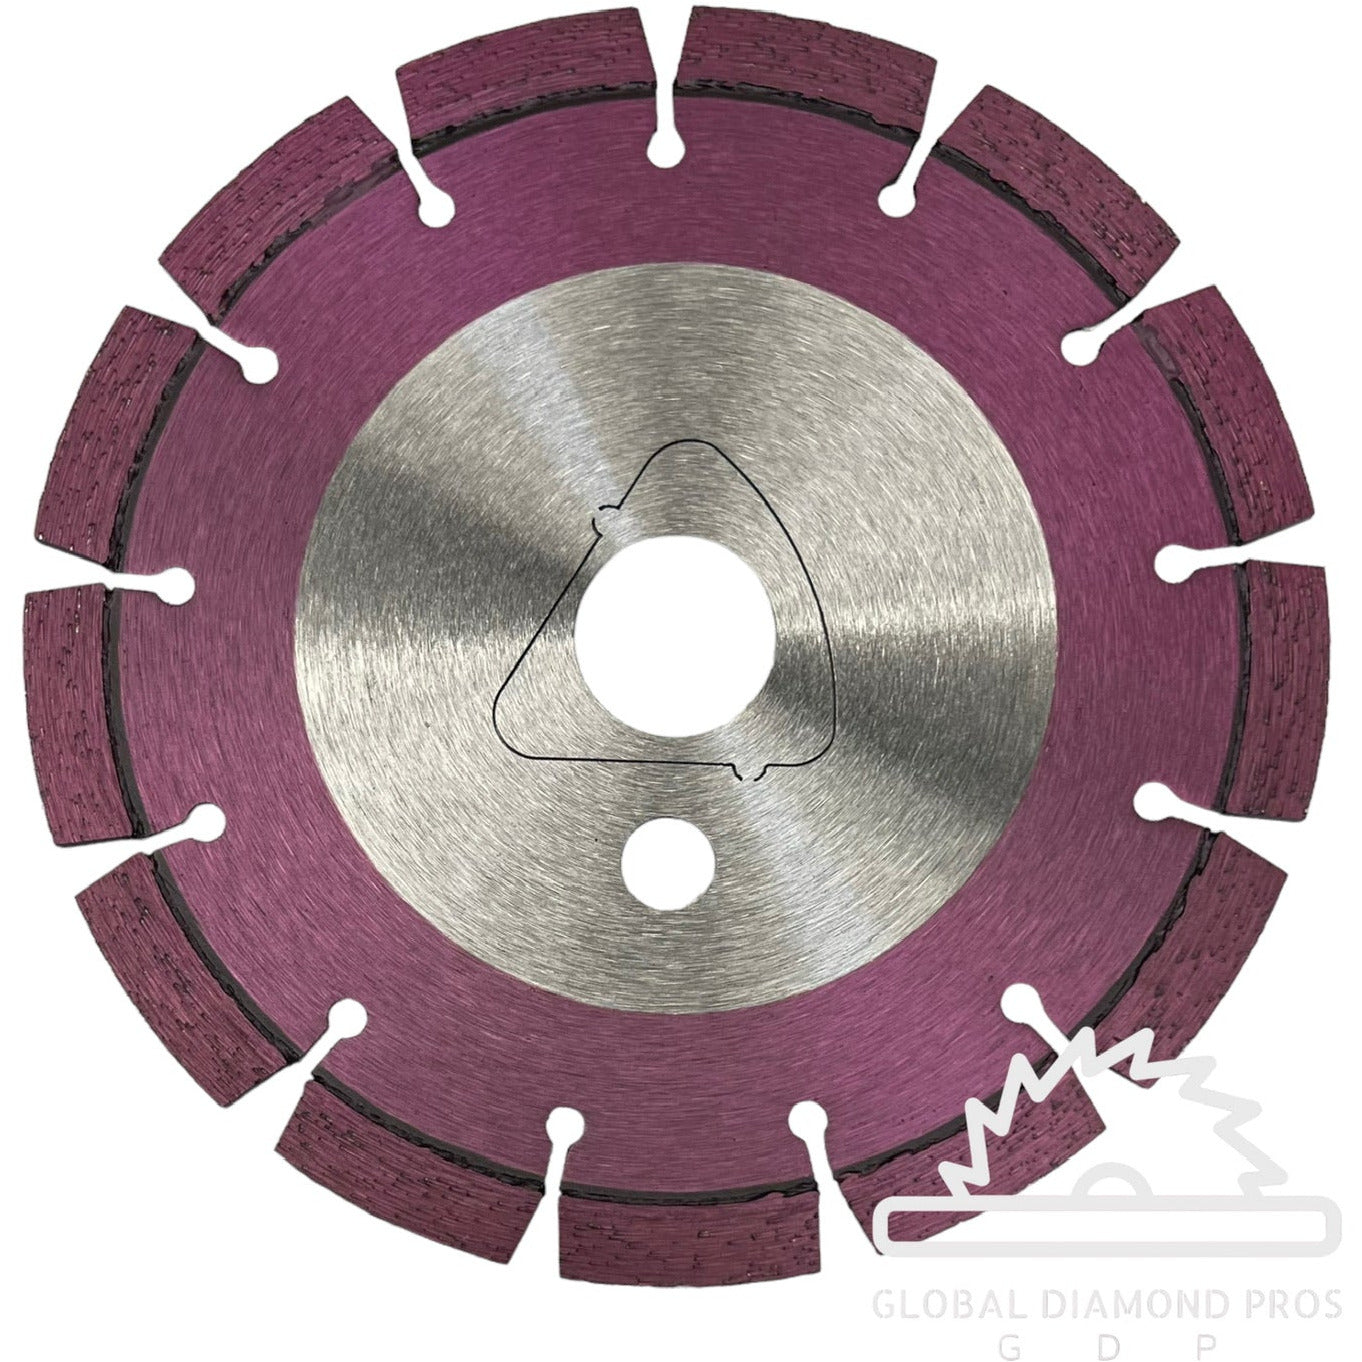 6” Early Entry Green Concrete Saw Blade Purple Cut